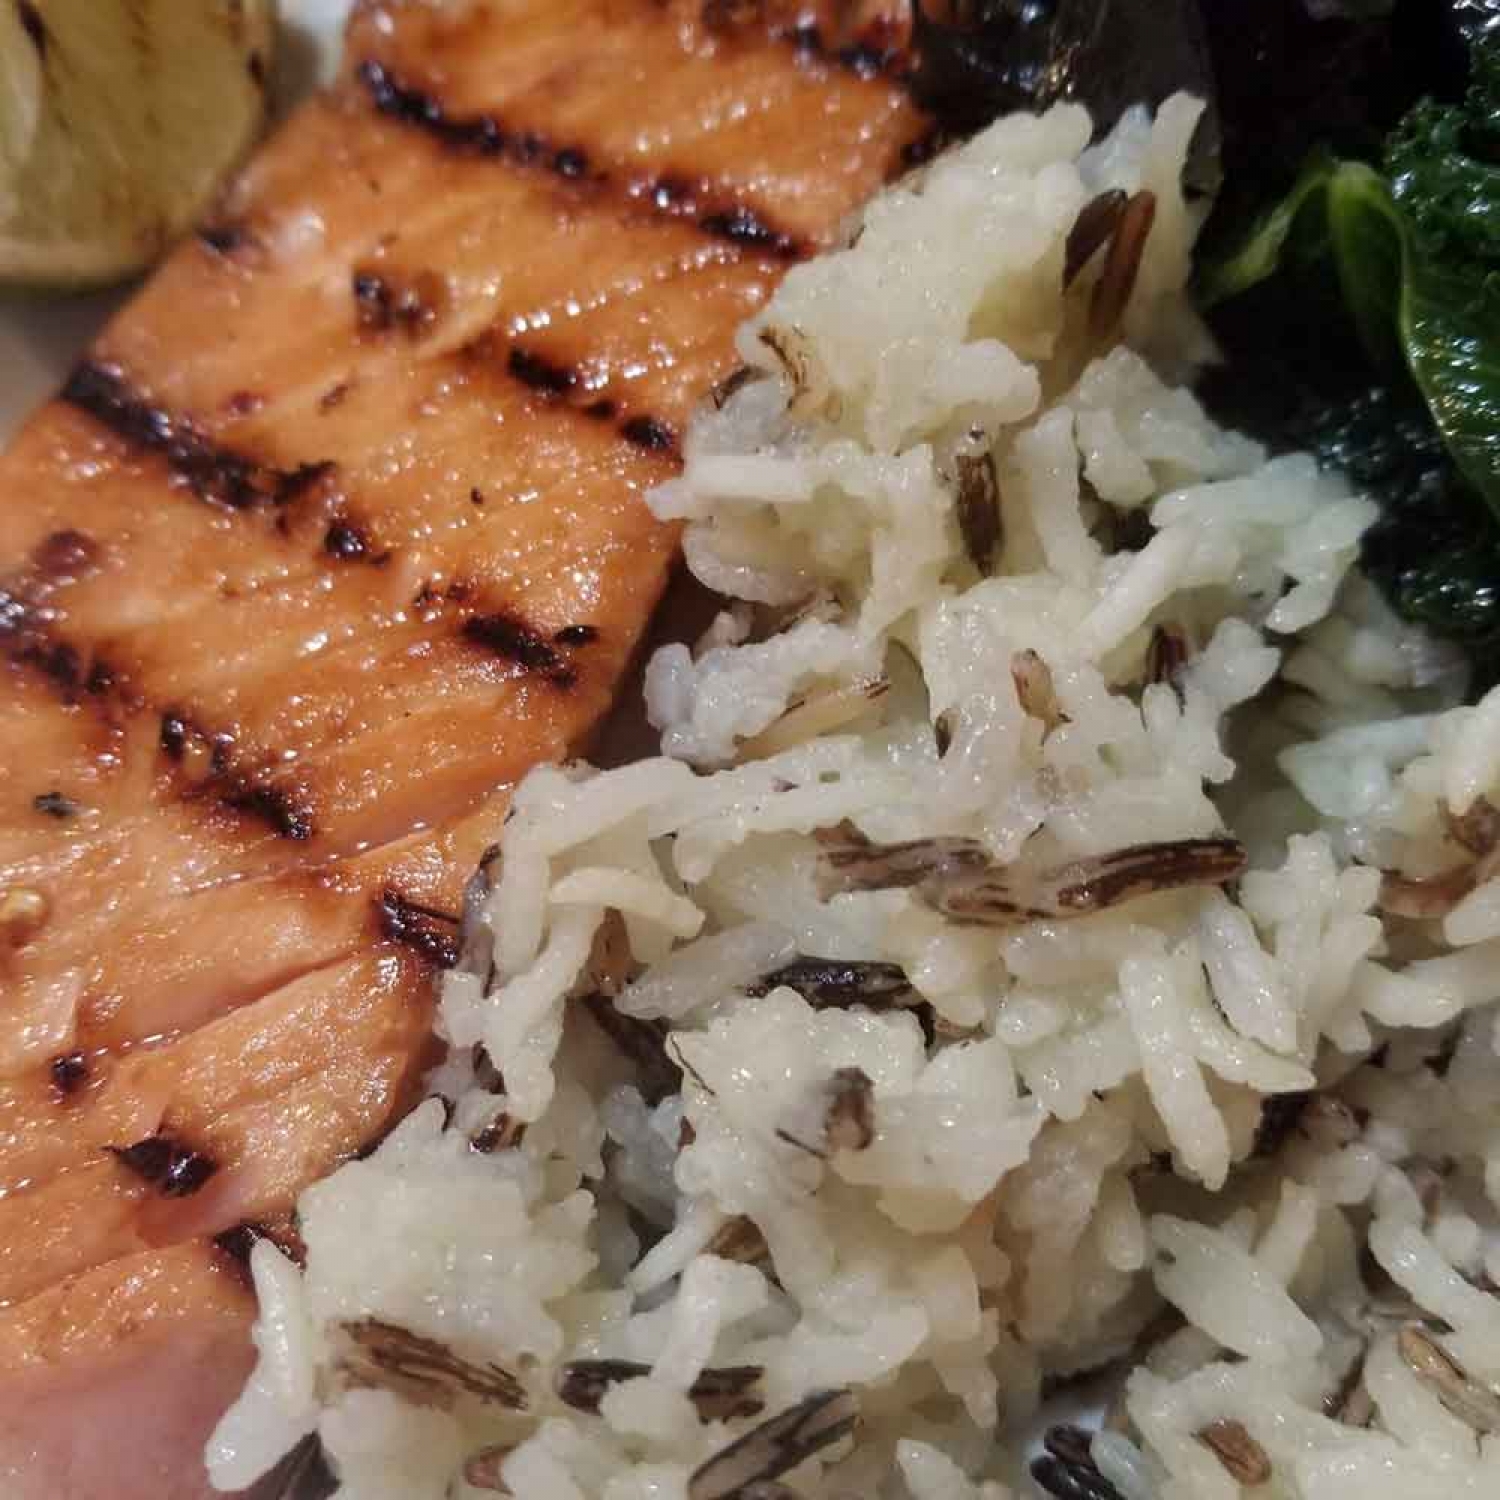 Grilled salmon with wild rice and sautéed kale